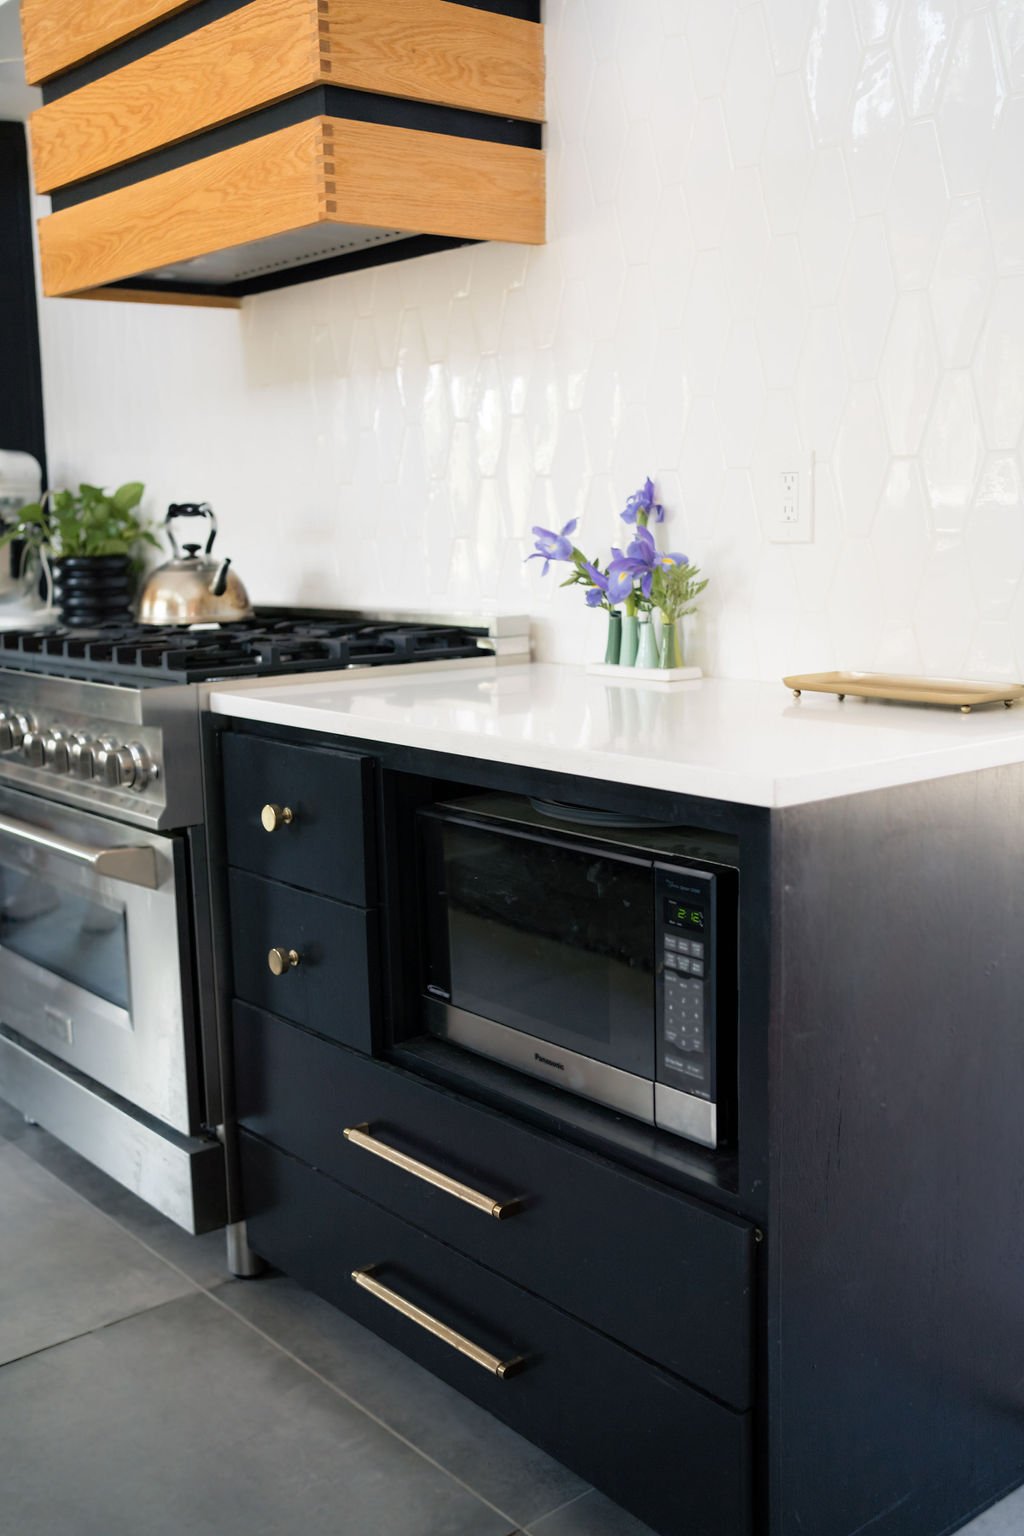 Black lower cabinets in a mid-century modern kitchen remodel.